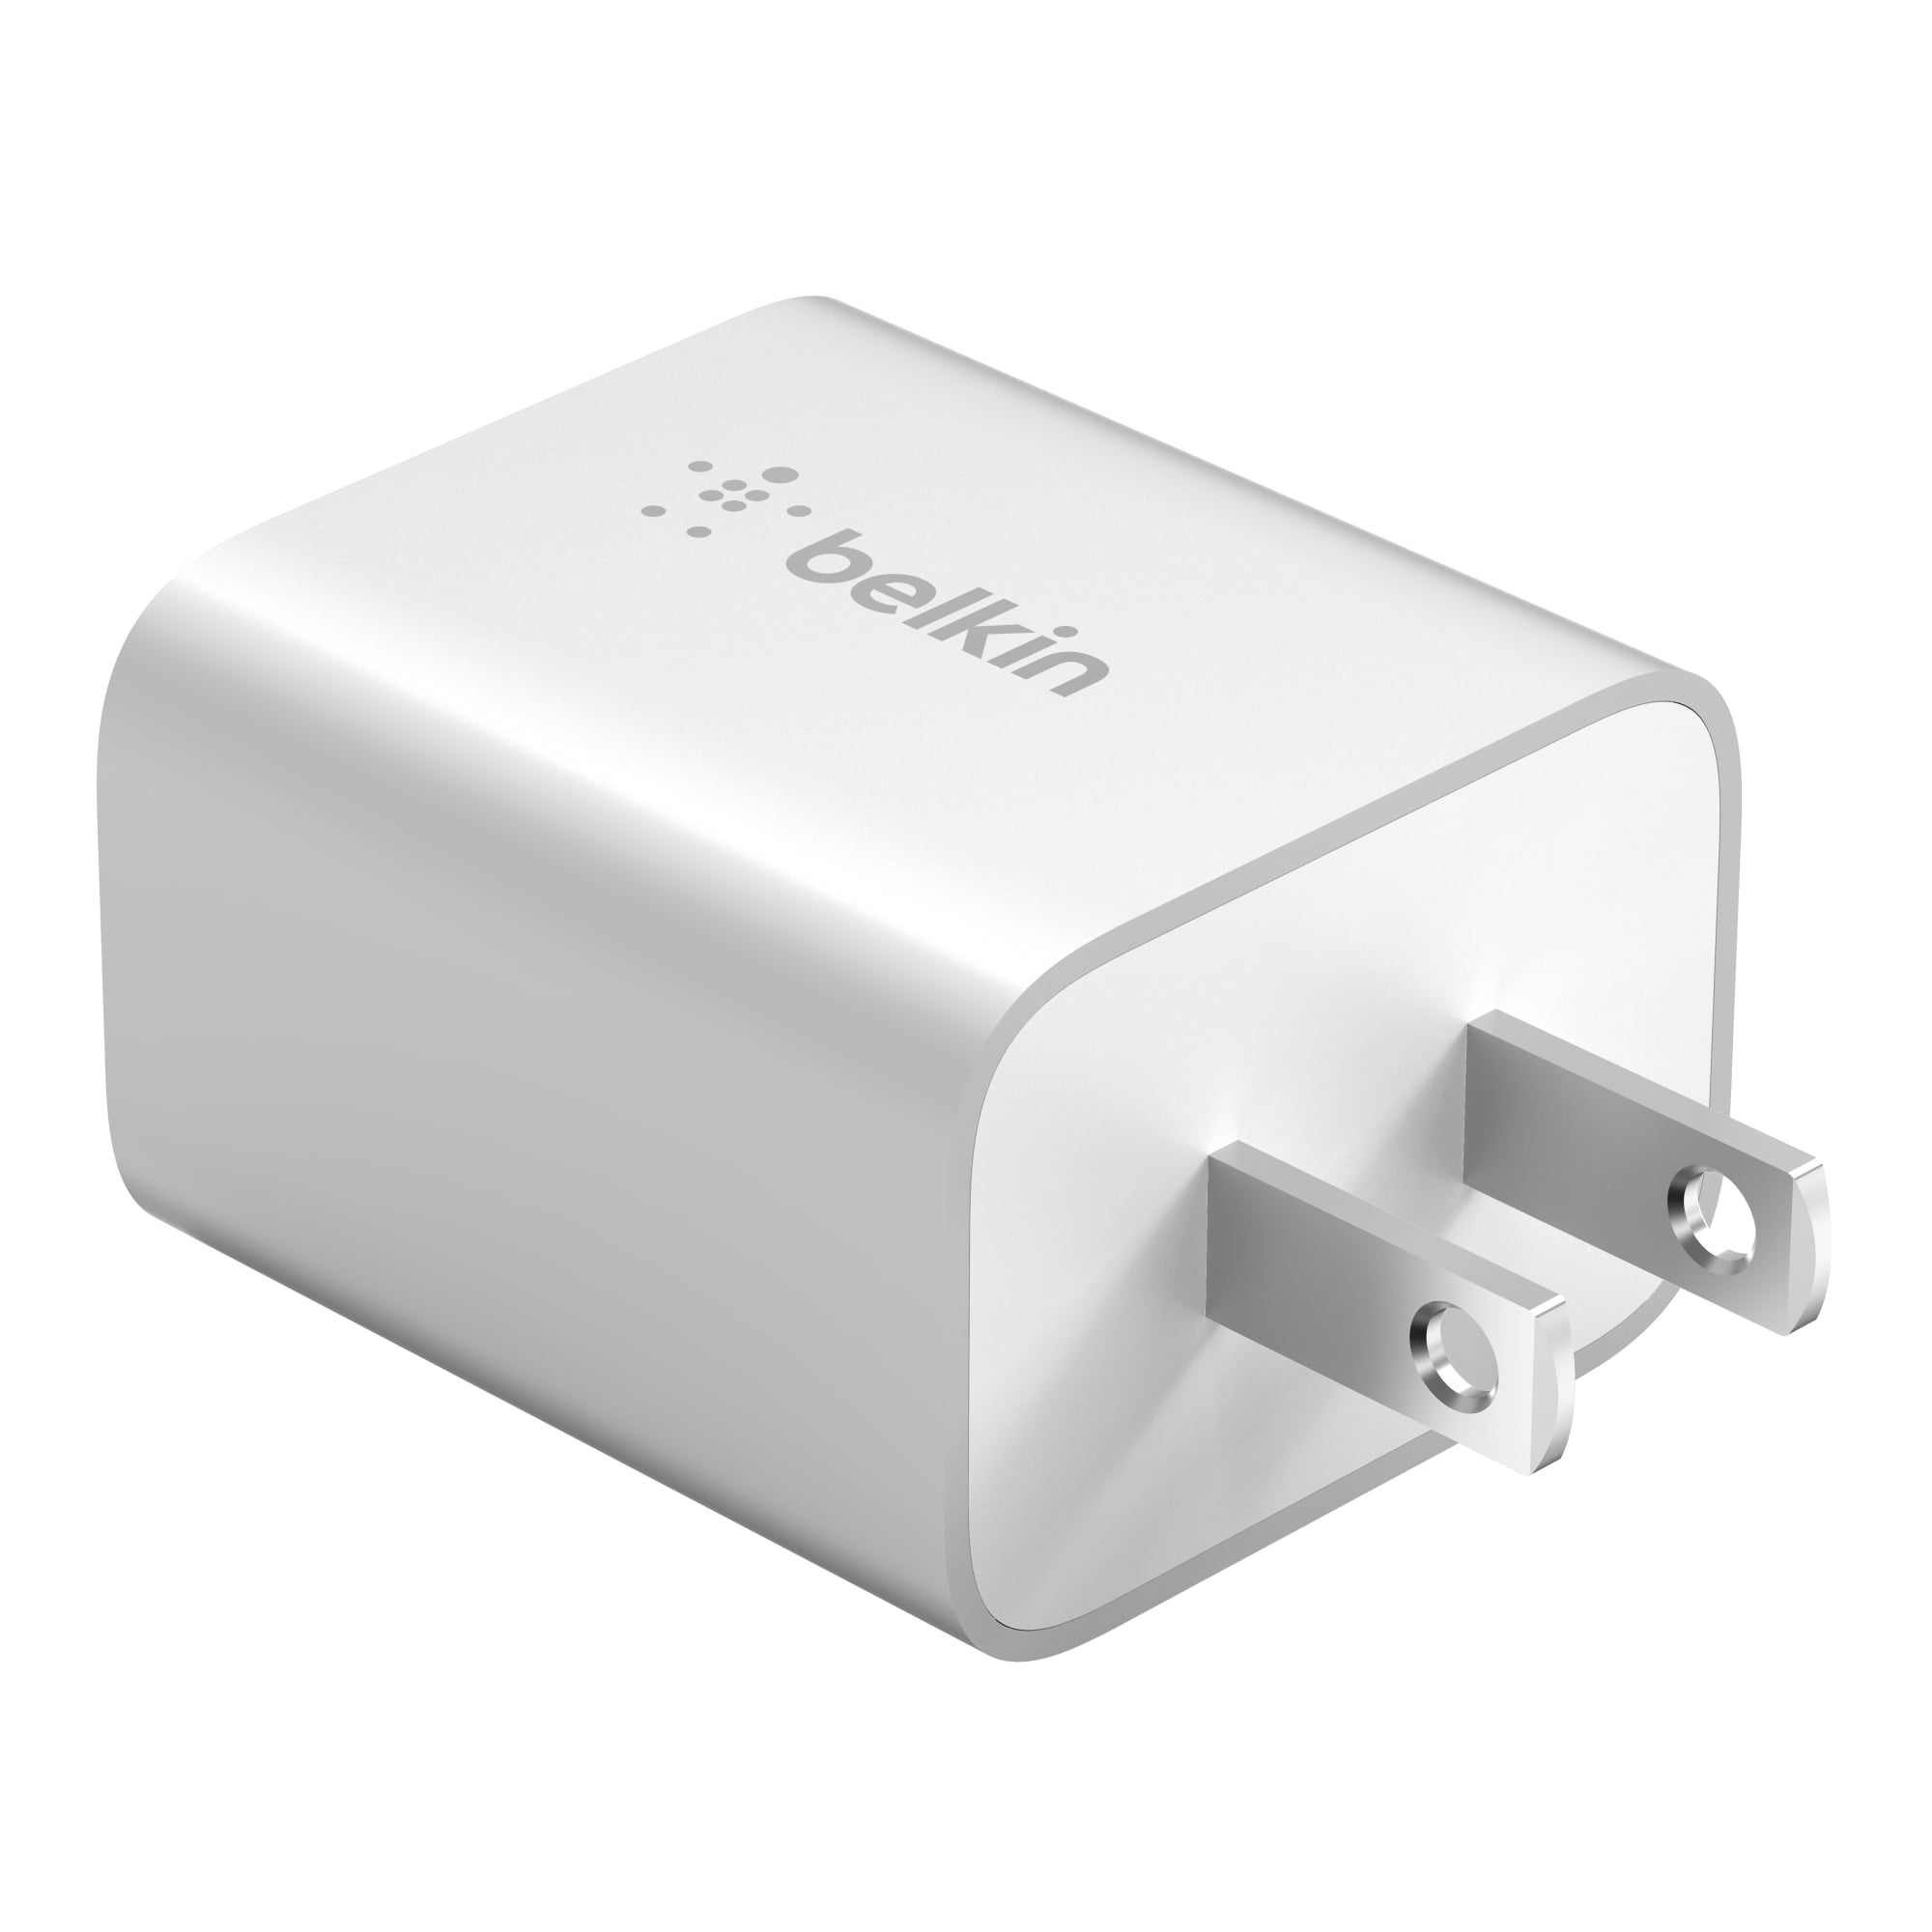 Belkin 20 Watt USB C Wall Charger - USB Type C Charger Fast Charging for  Apple iPhone 14, 14 Pro, 14 Pro Max, 13, 13 Pro, 13 Pro Max, Galaxy S21  Ultra,